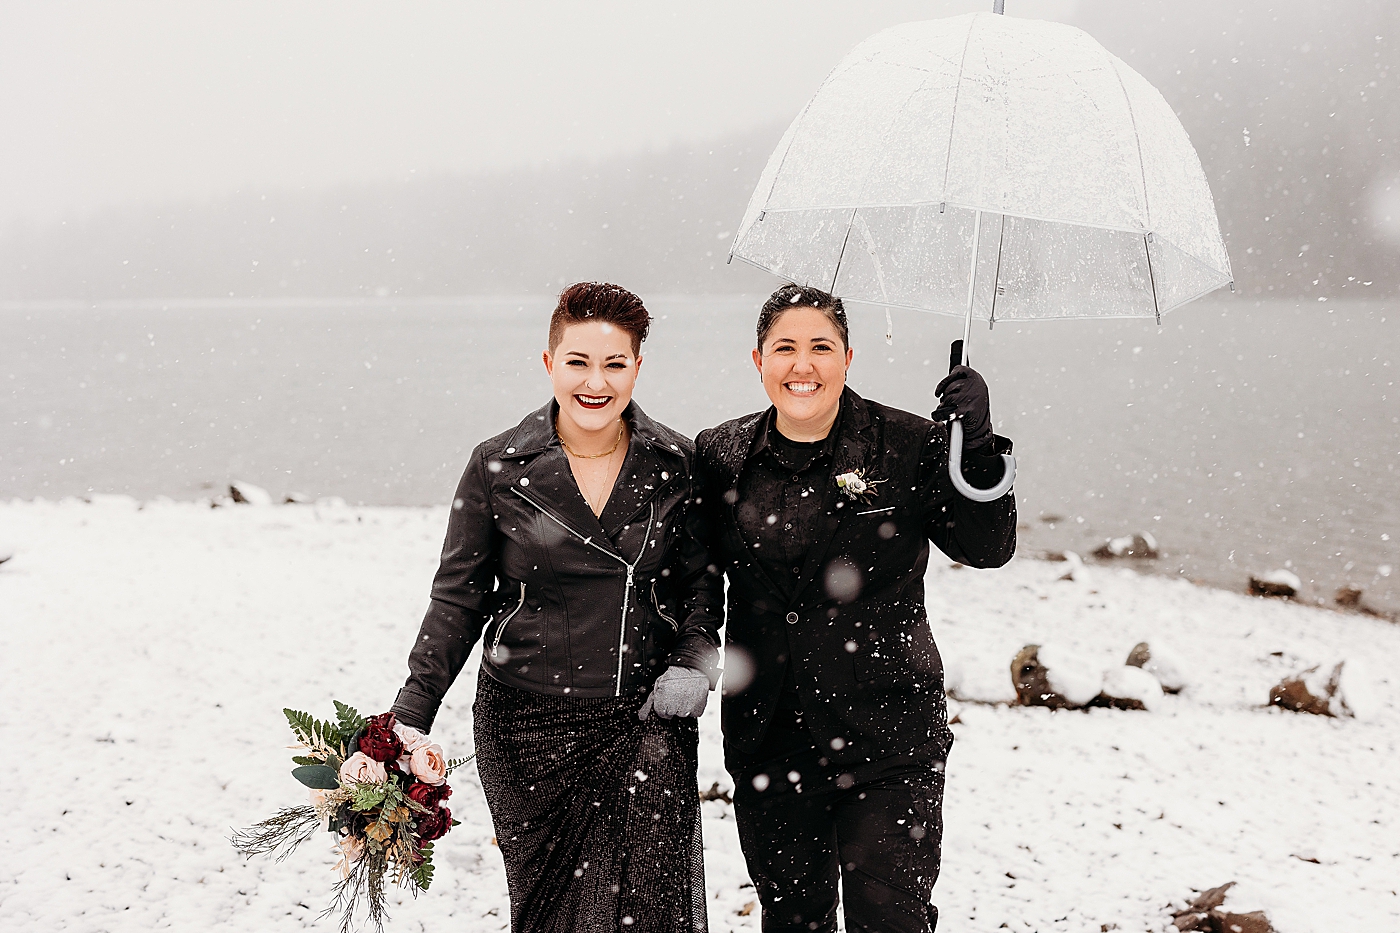 Snowy winter elopement in the PNW. Photo by Megan Montalvo Photography.